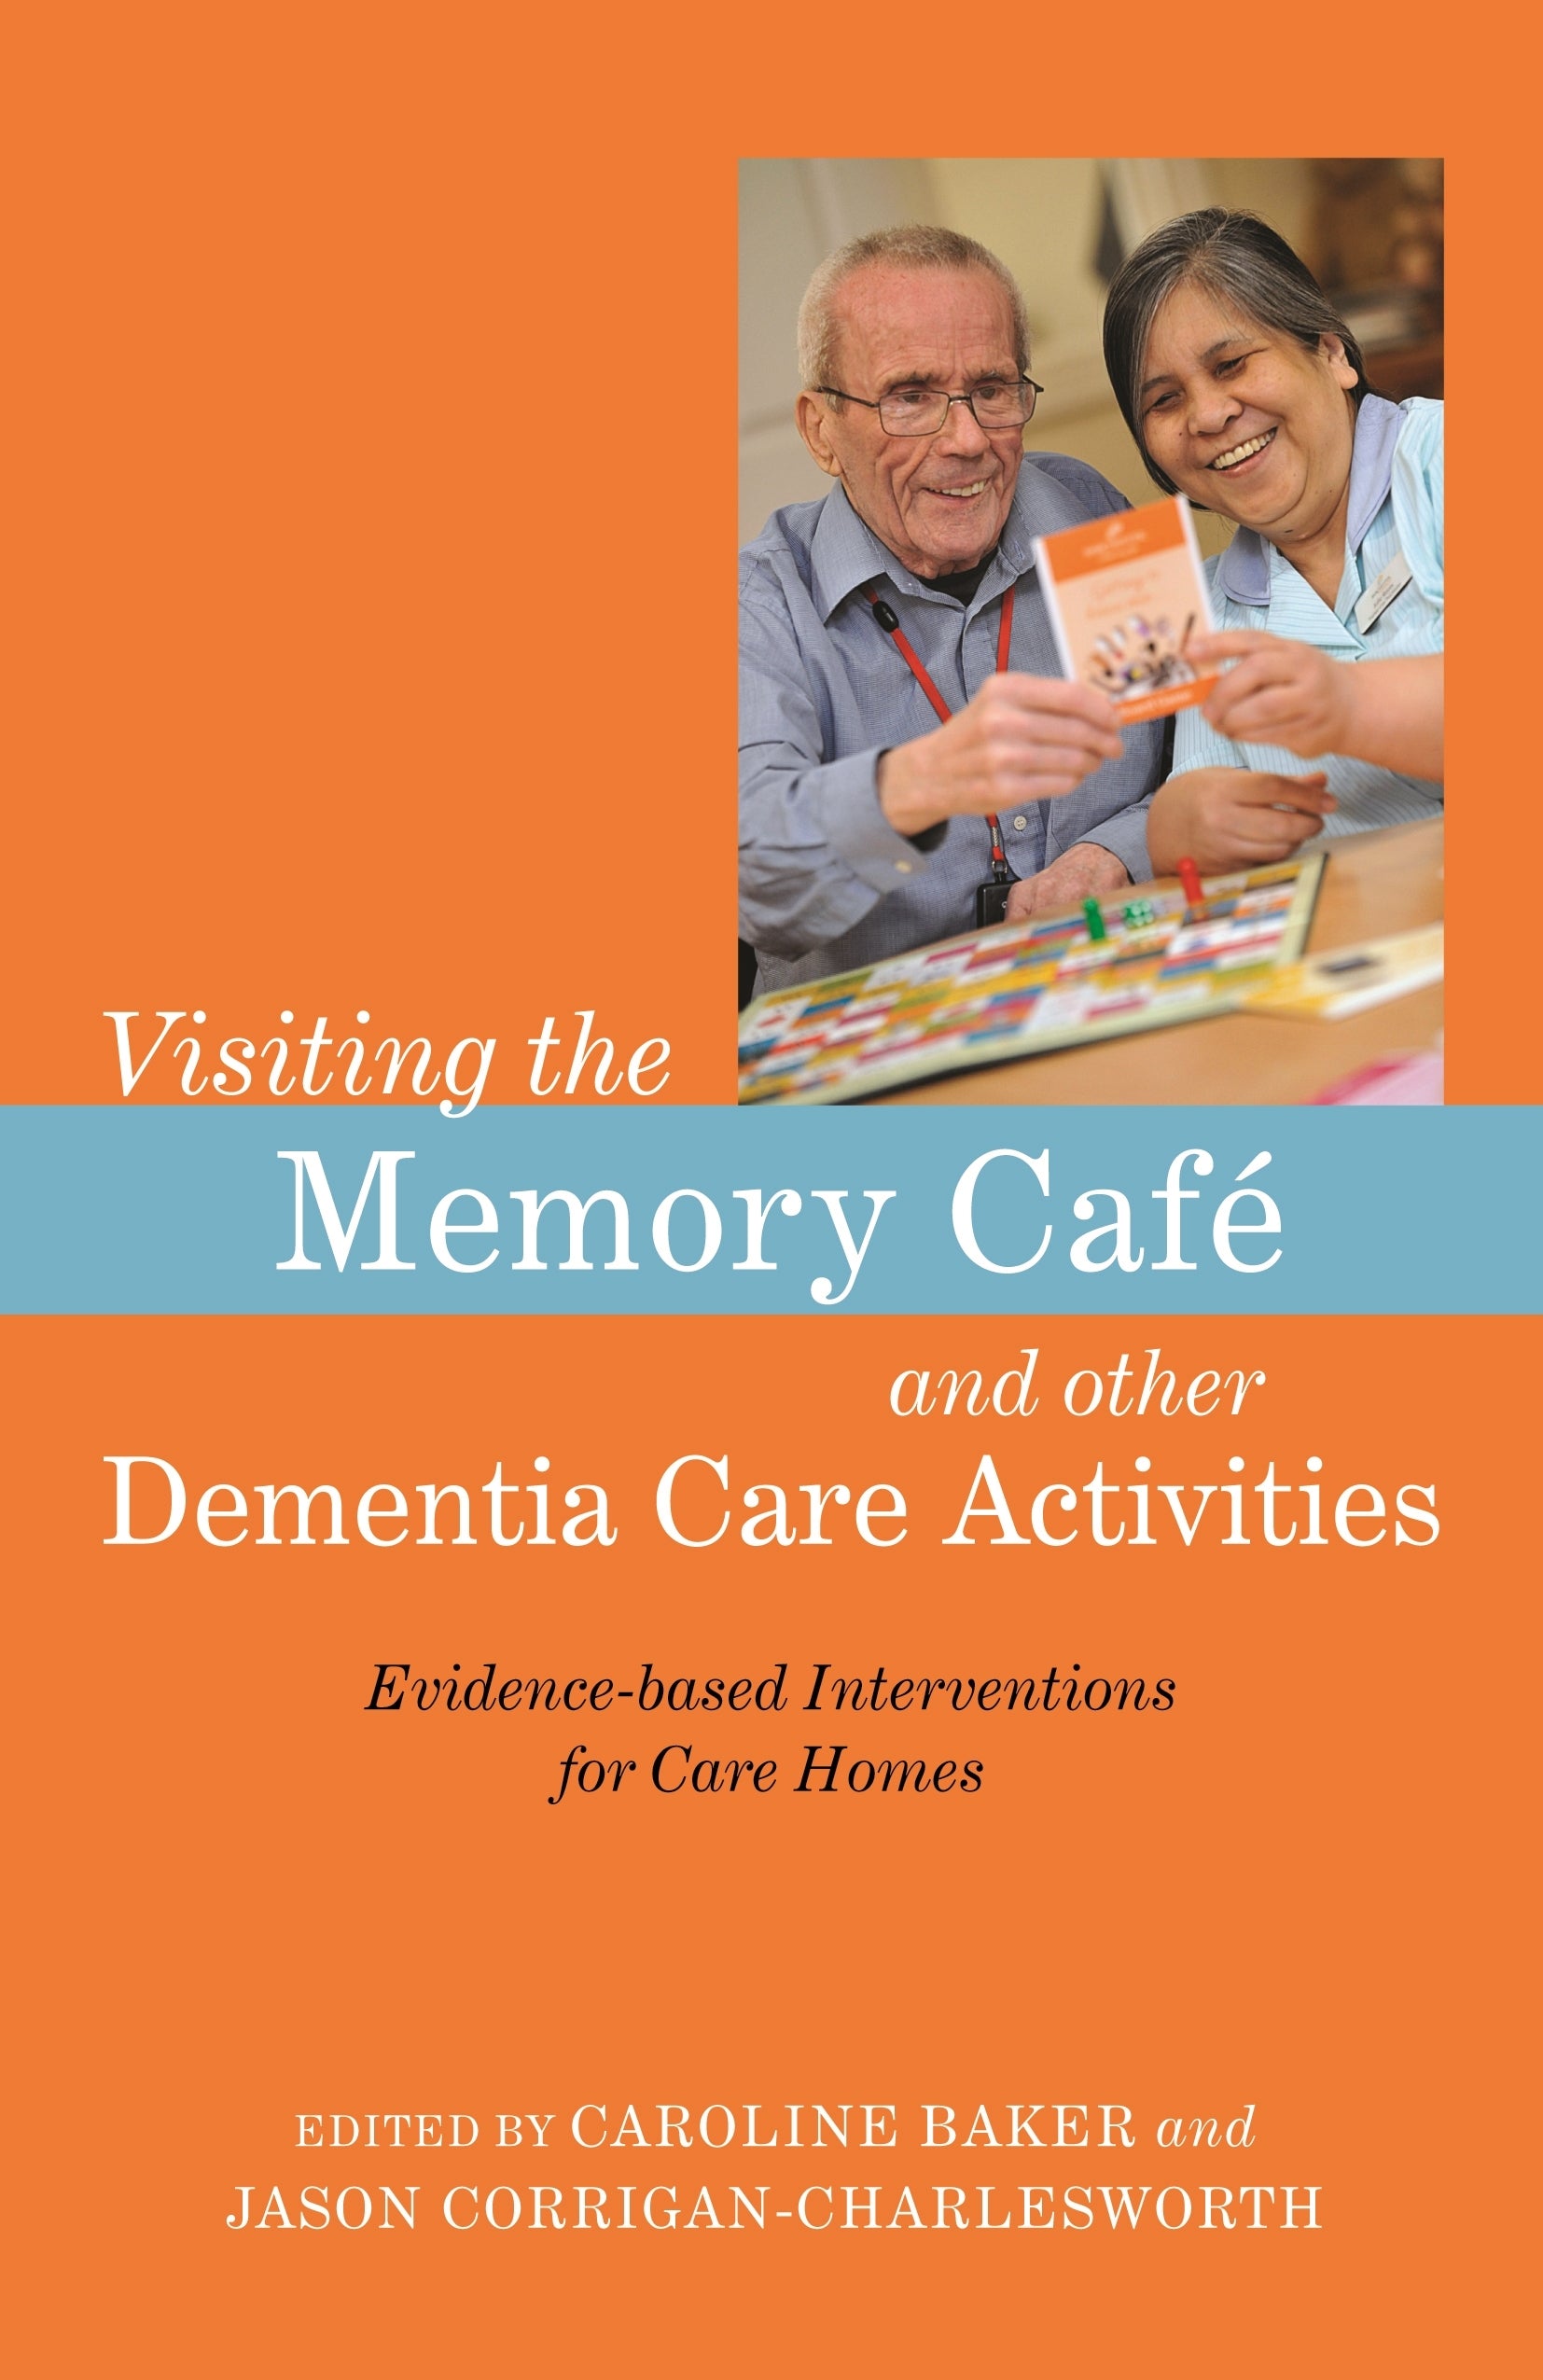 Visiting the Memory Café and other Dementia Care Activities by Caroline Baker, Jason Corrigan-Charlesworth, No Author Listed